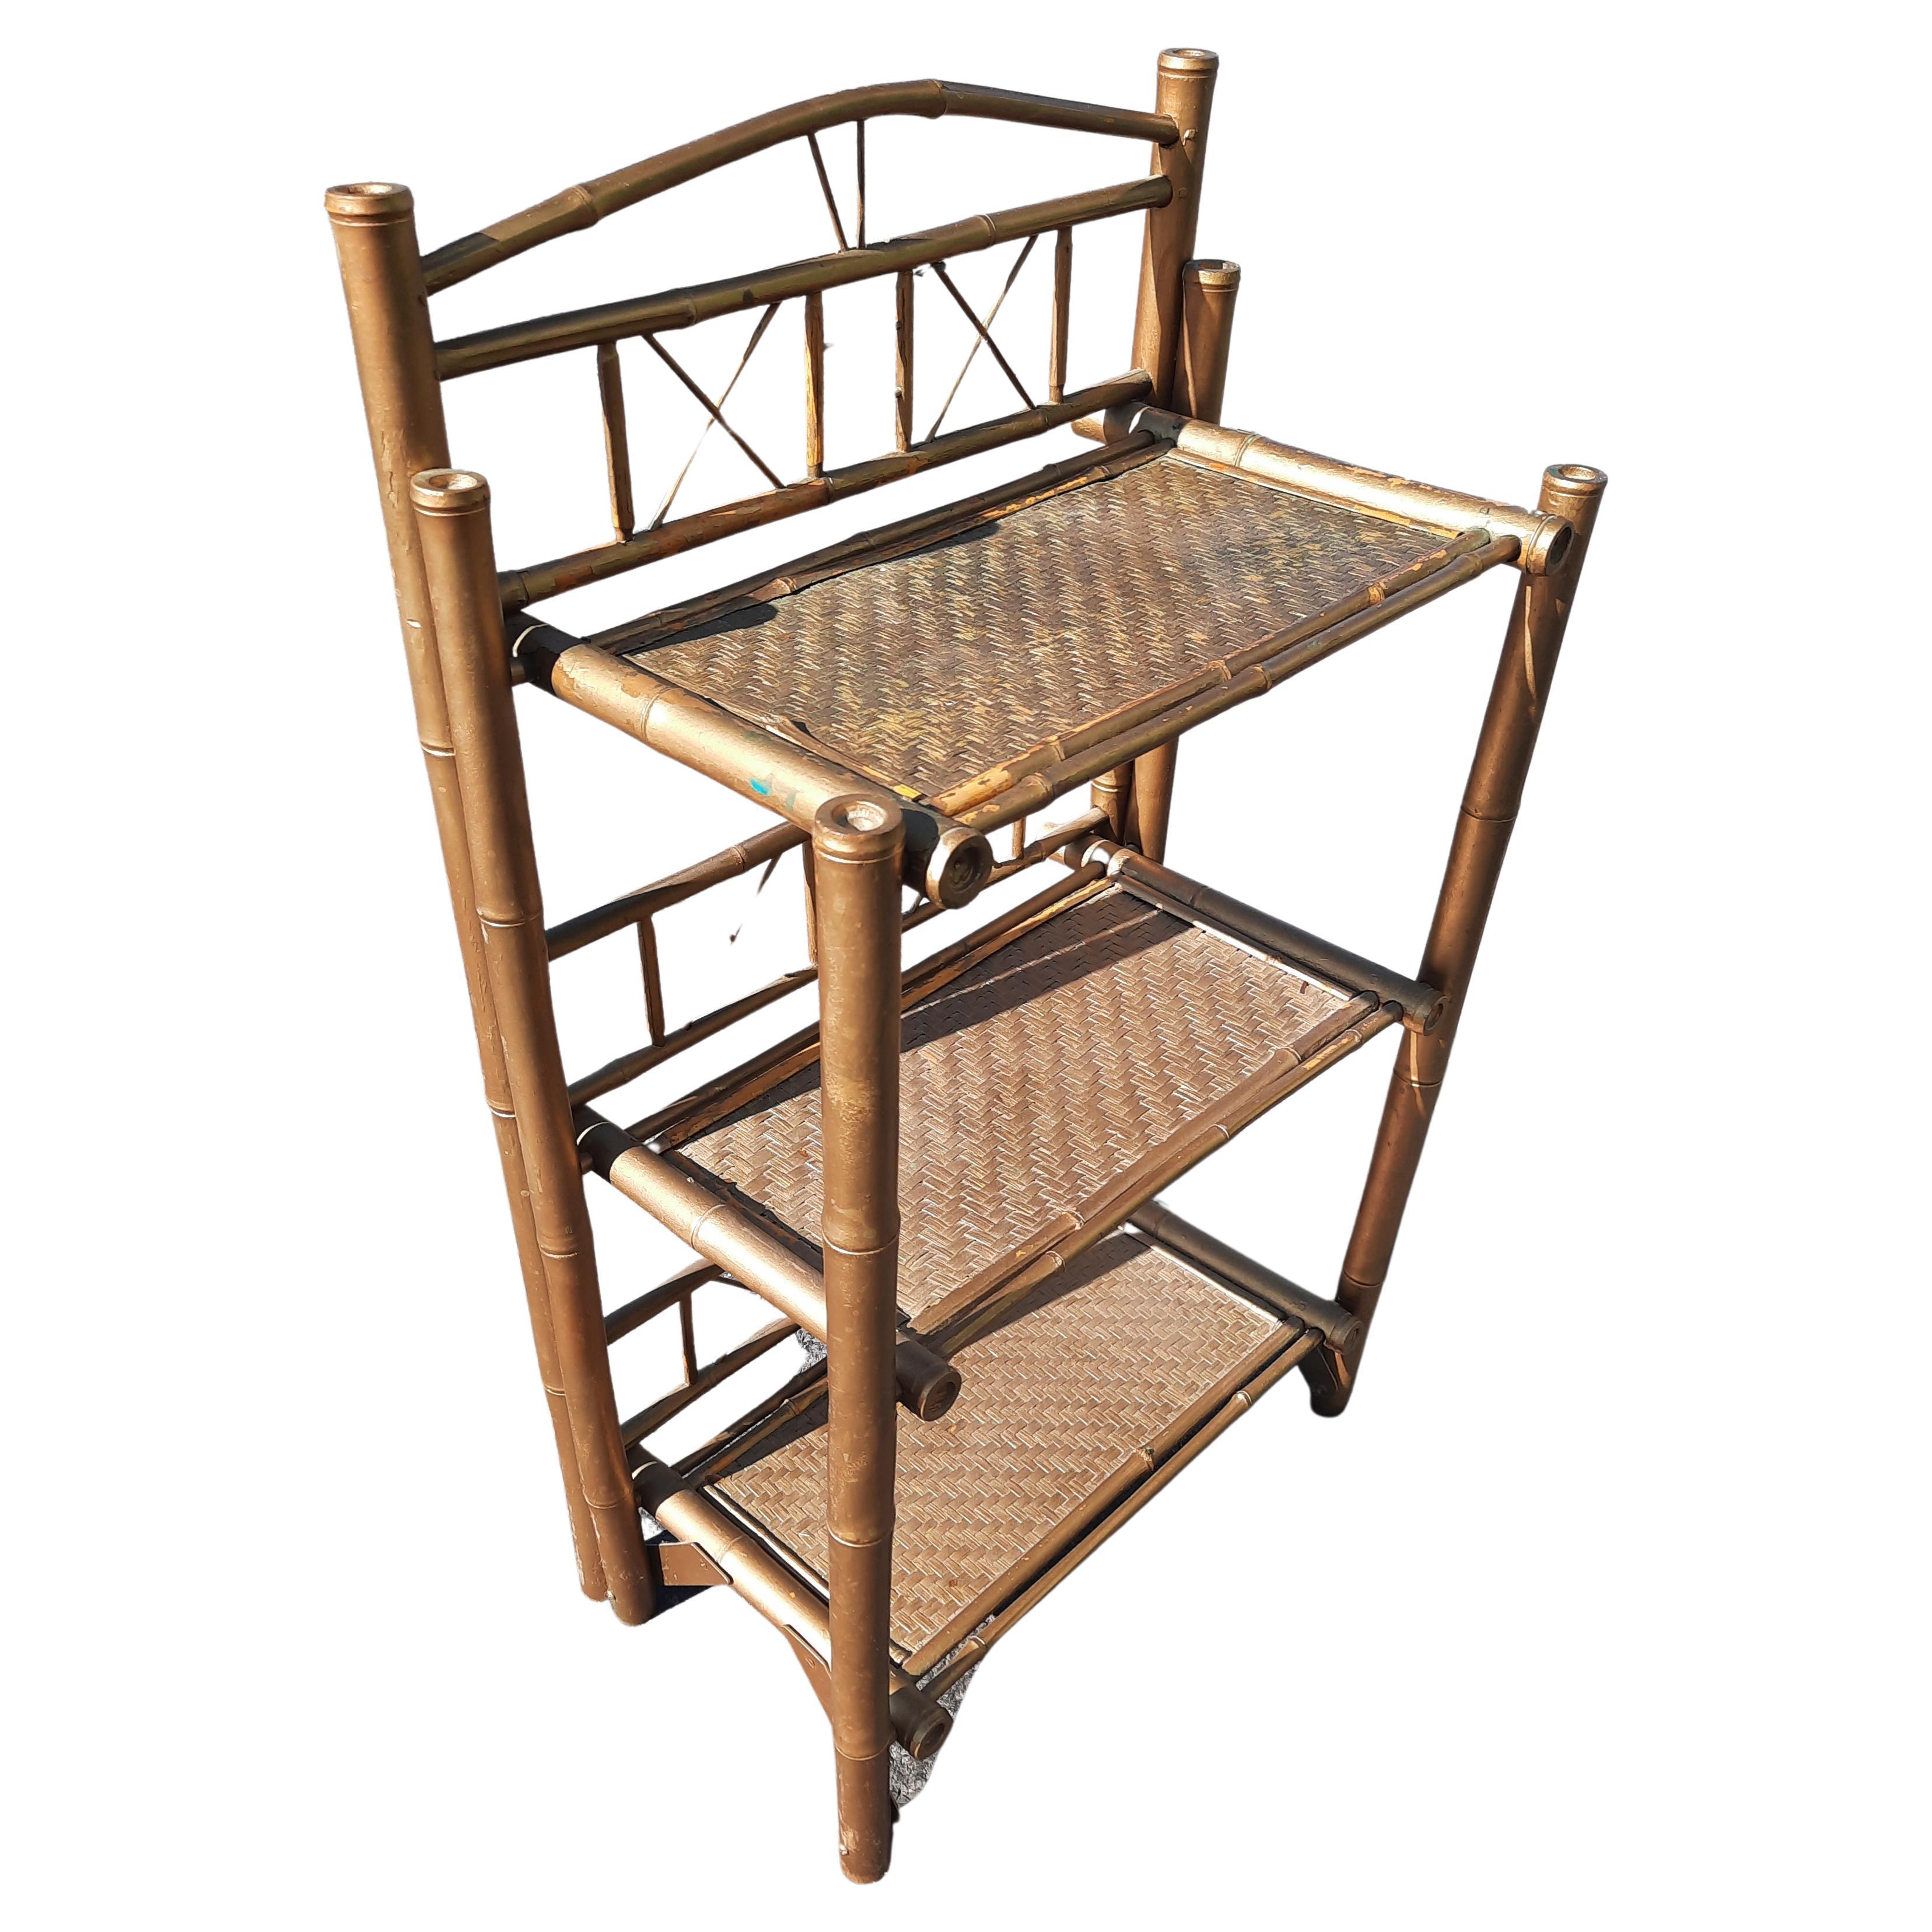 Antique tortoise bamboo and Woven Wicker Etagere bookshelf. Bamboo rods and woven wicker shelves make this etagere shelving unique. This Boho chic style provides wonderful rustic visual effect, yet lends itself to both chinoiserie and modern